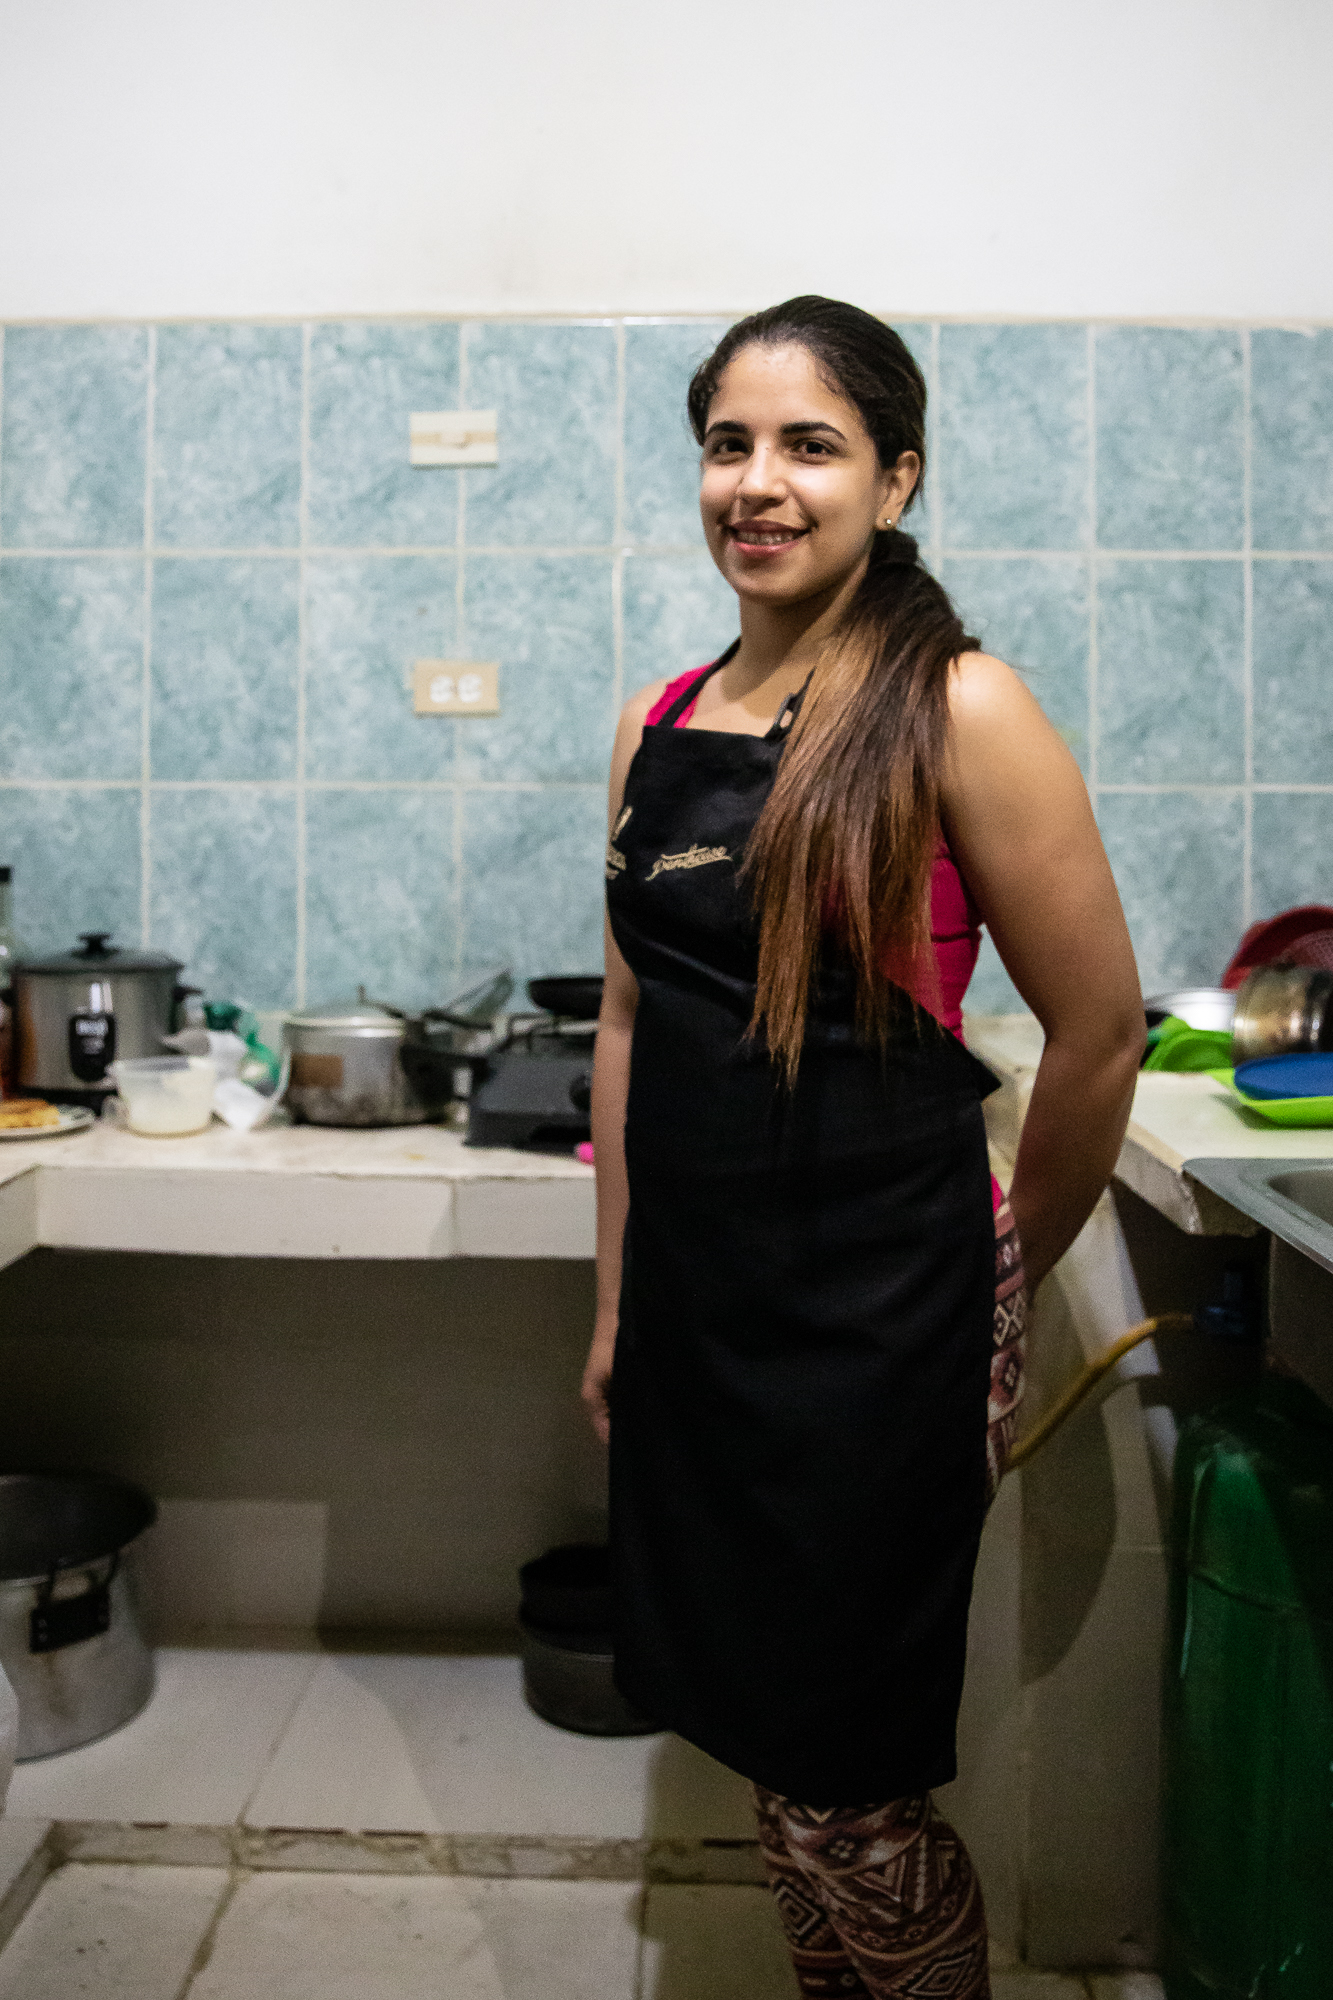 A woman wearing an apron poses for a portrait in her kitchen